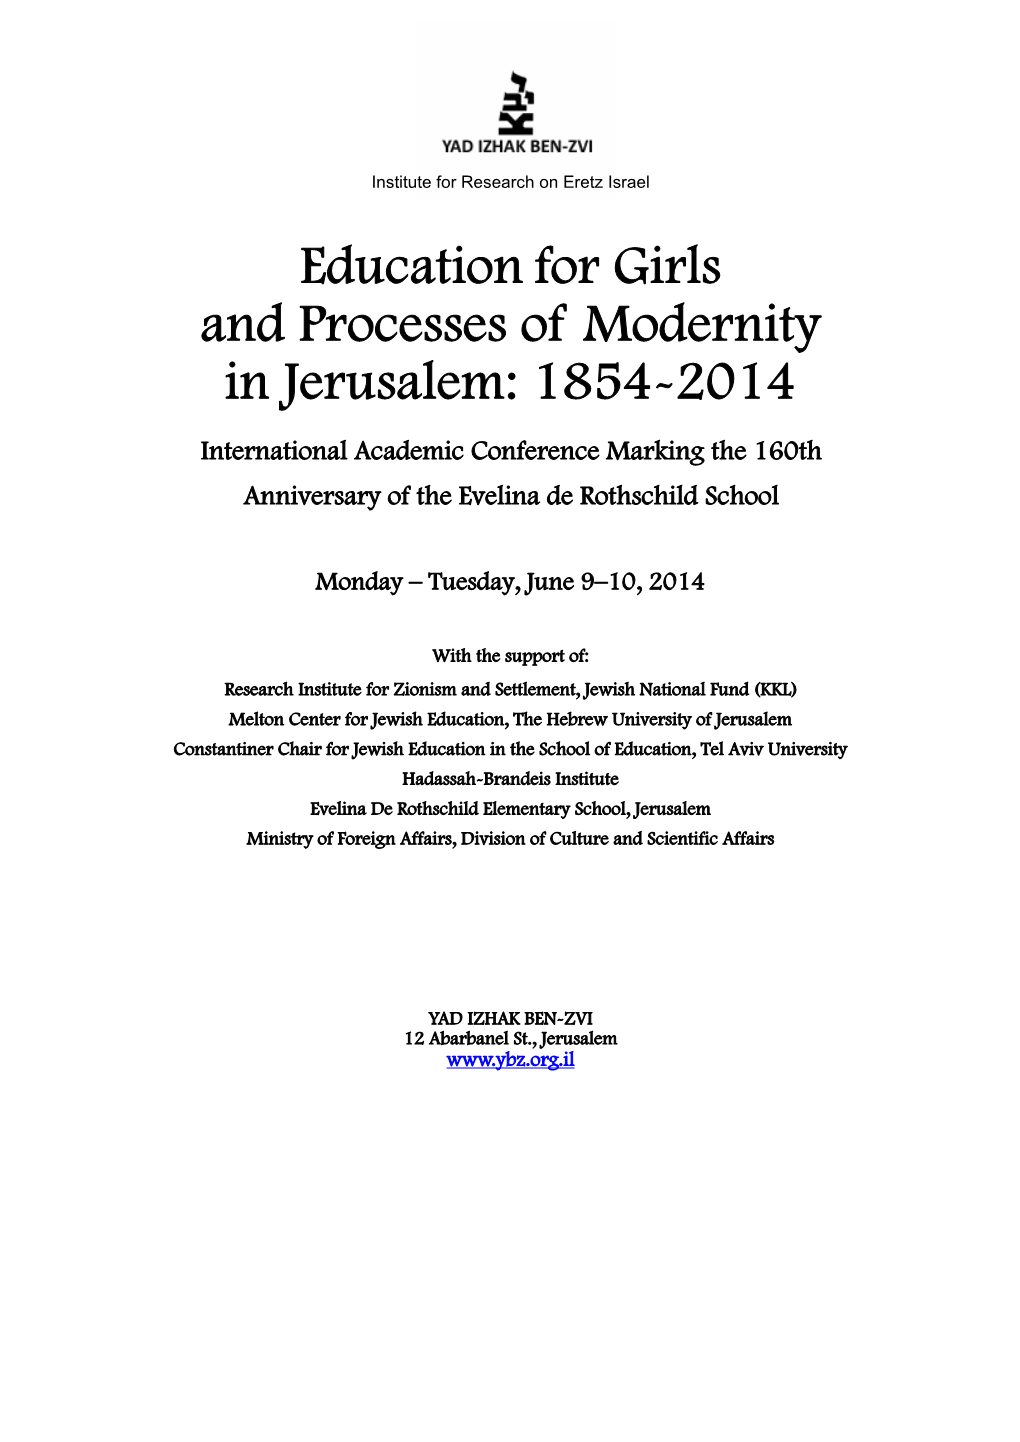 Education for Girls and Processes of Modernity in Jerusalem: 1854-2014